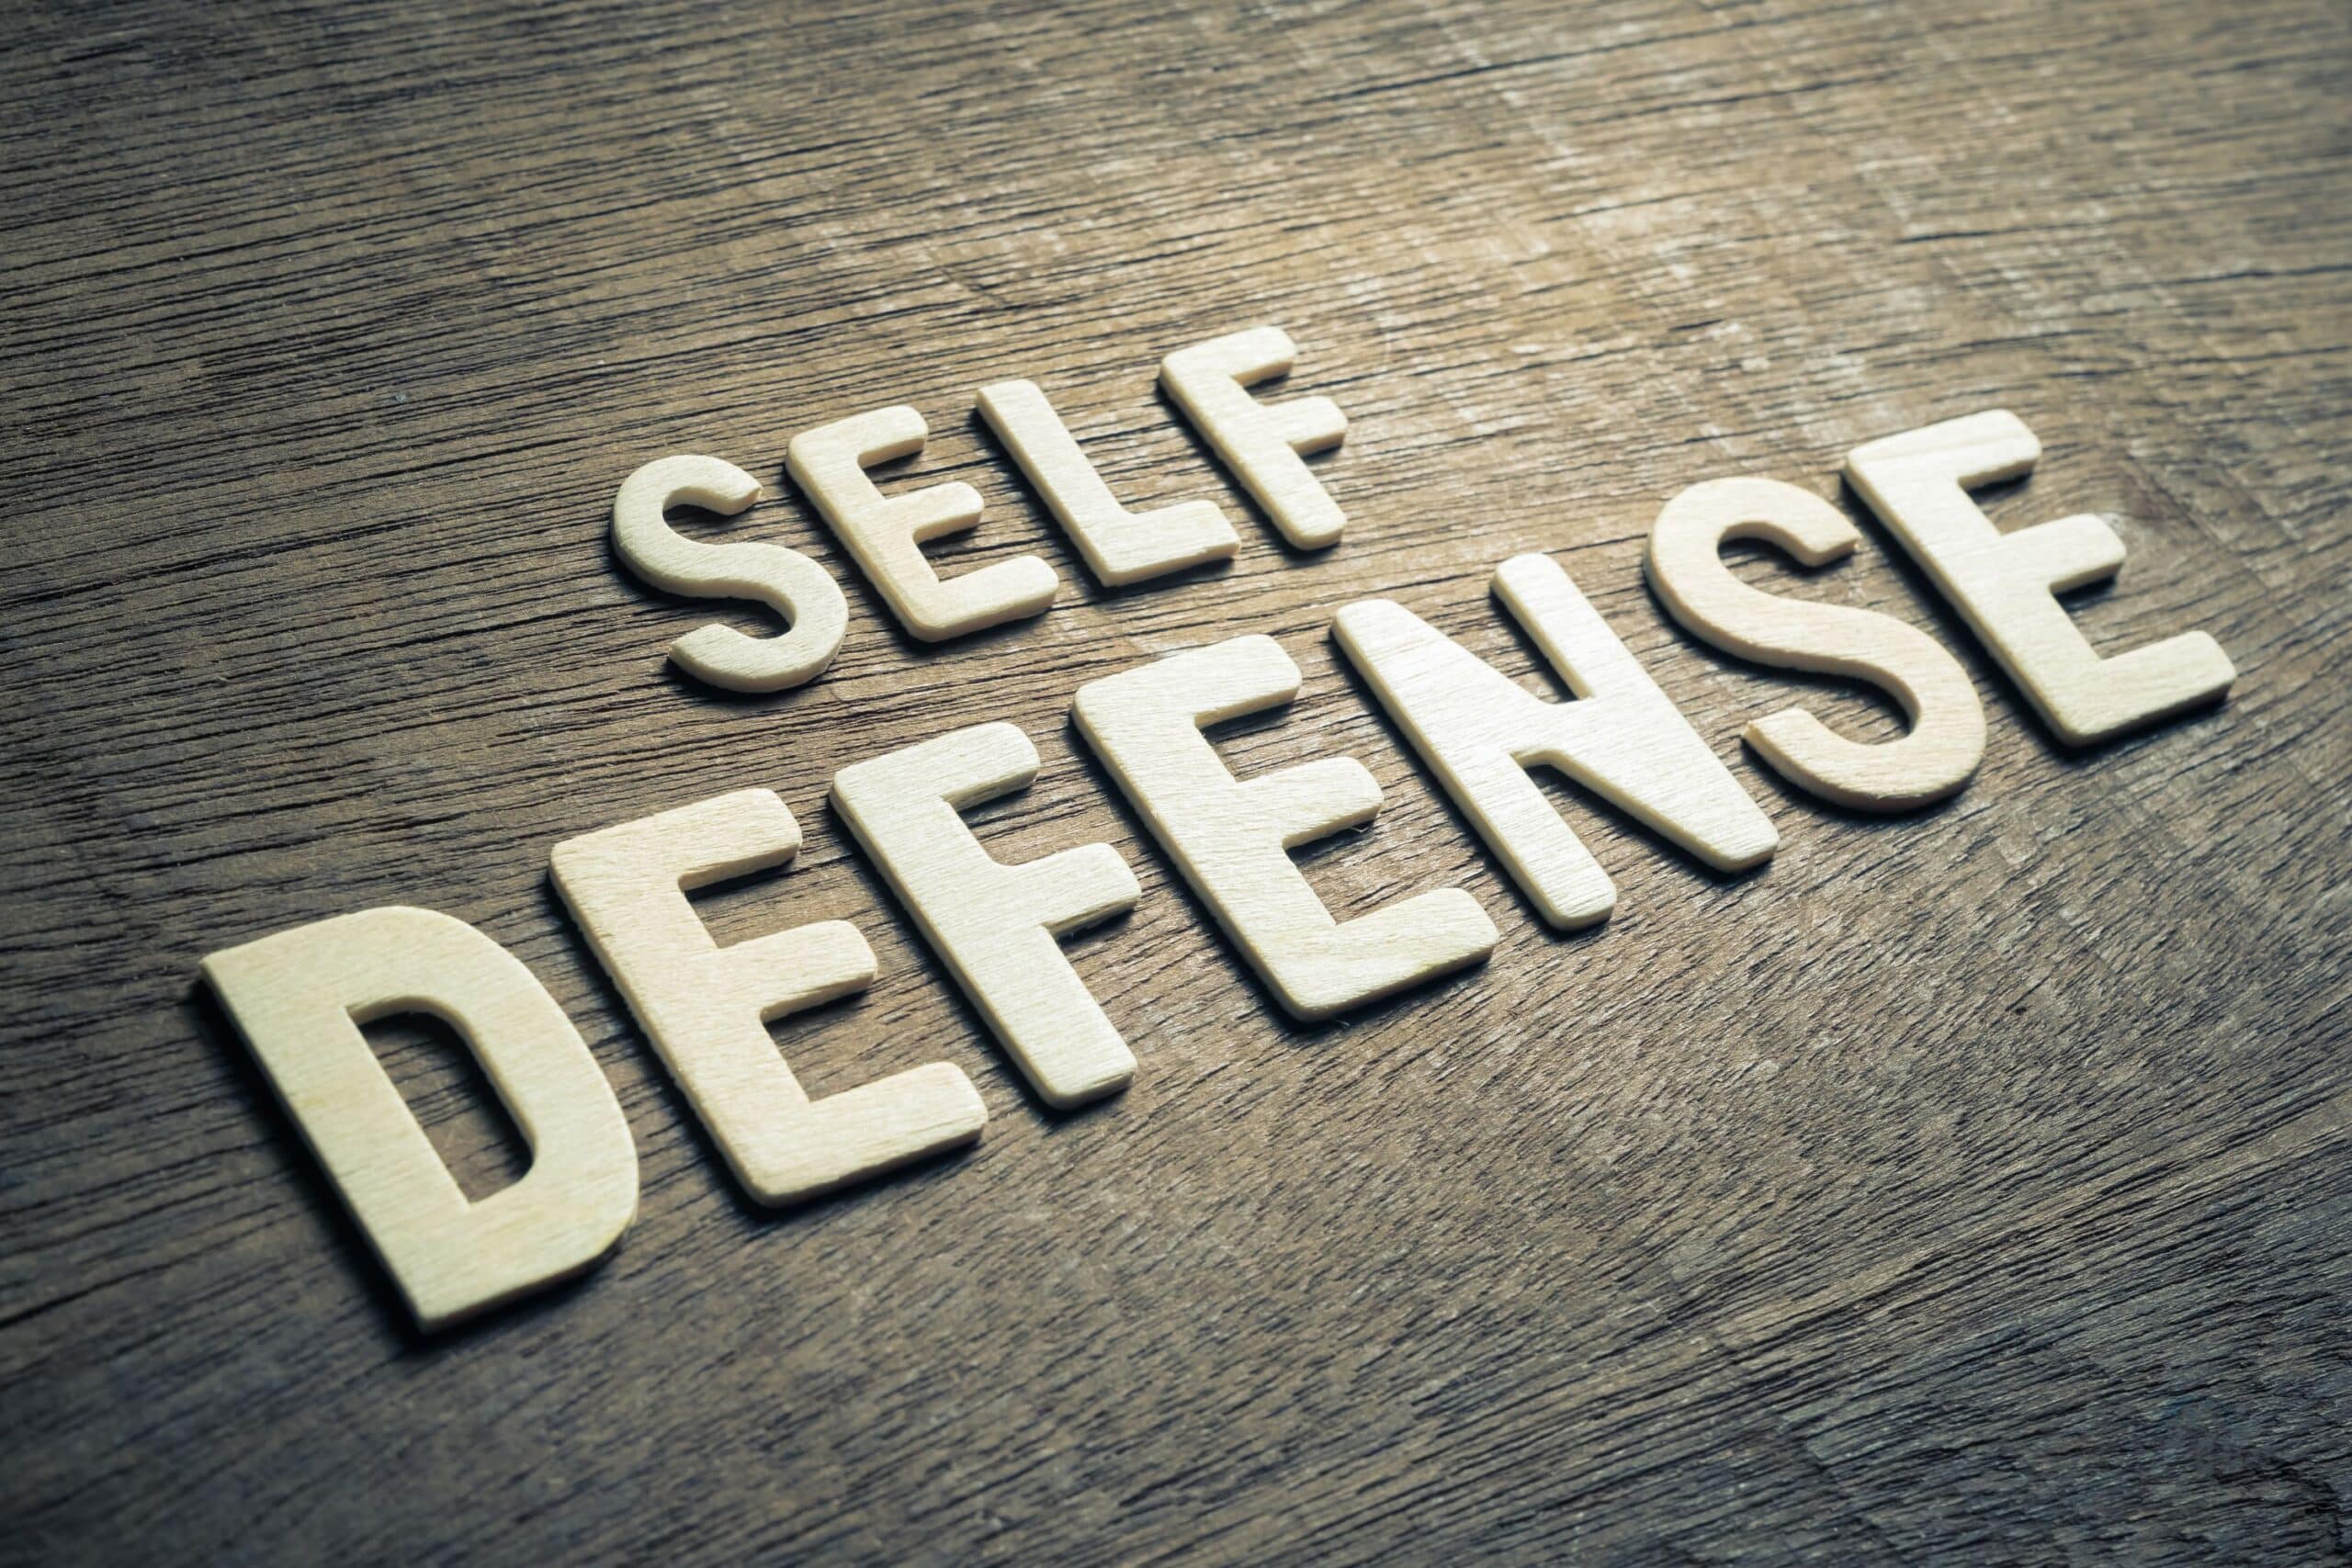 Texas’s Castle Doctrine: What You Need to Know About Self-Defense Laws